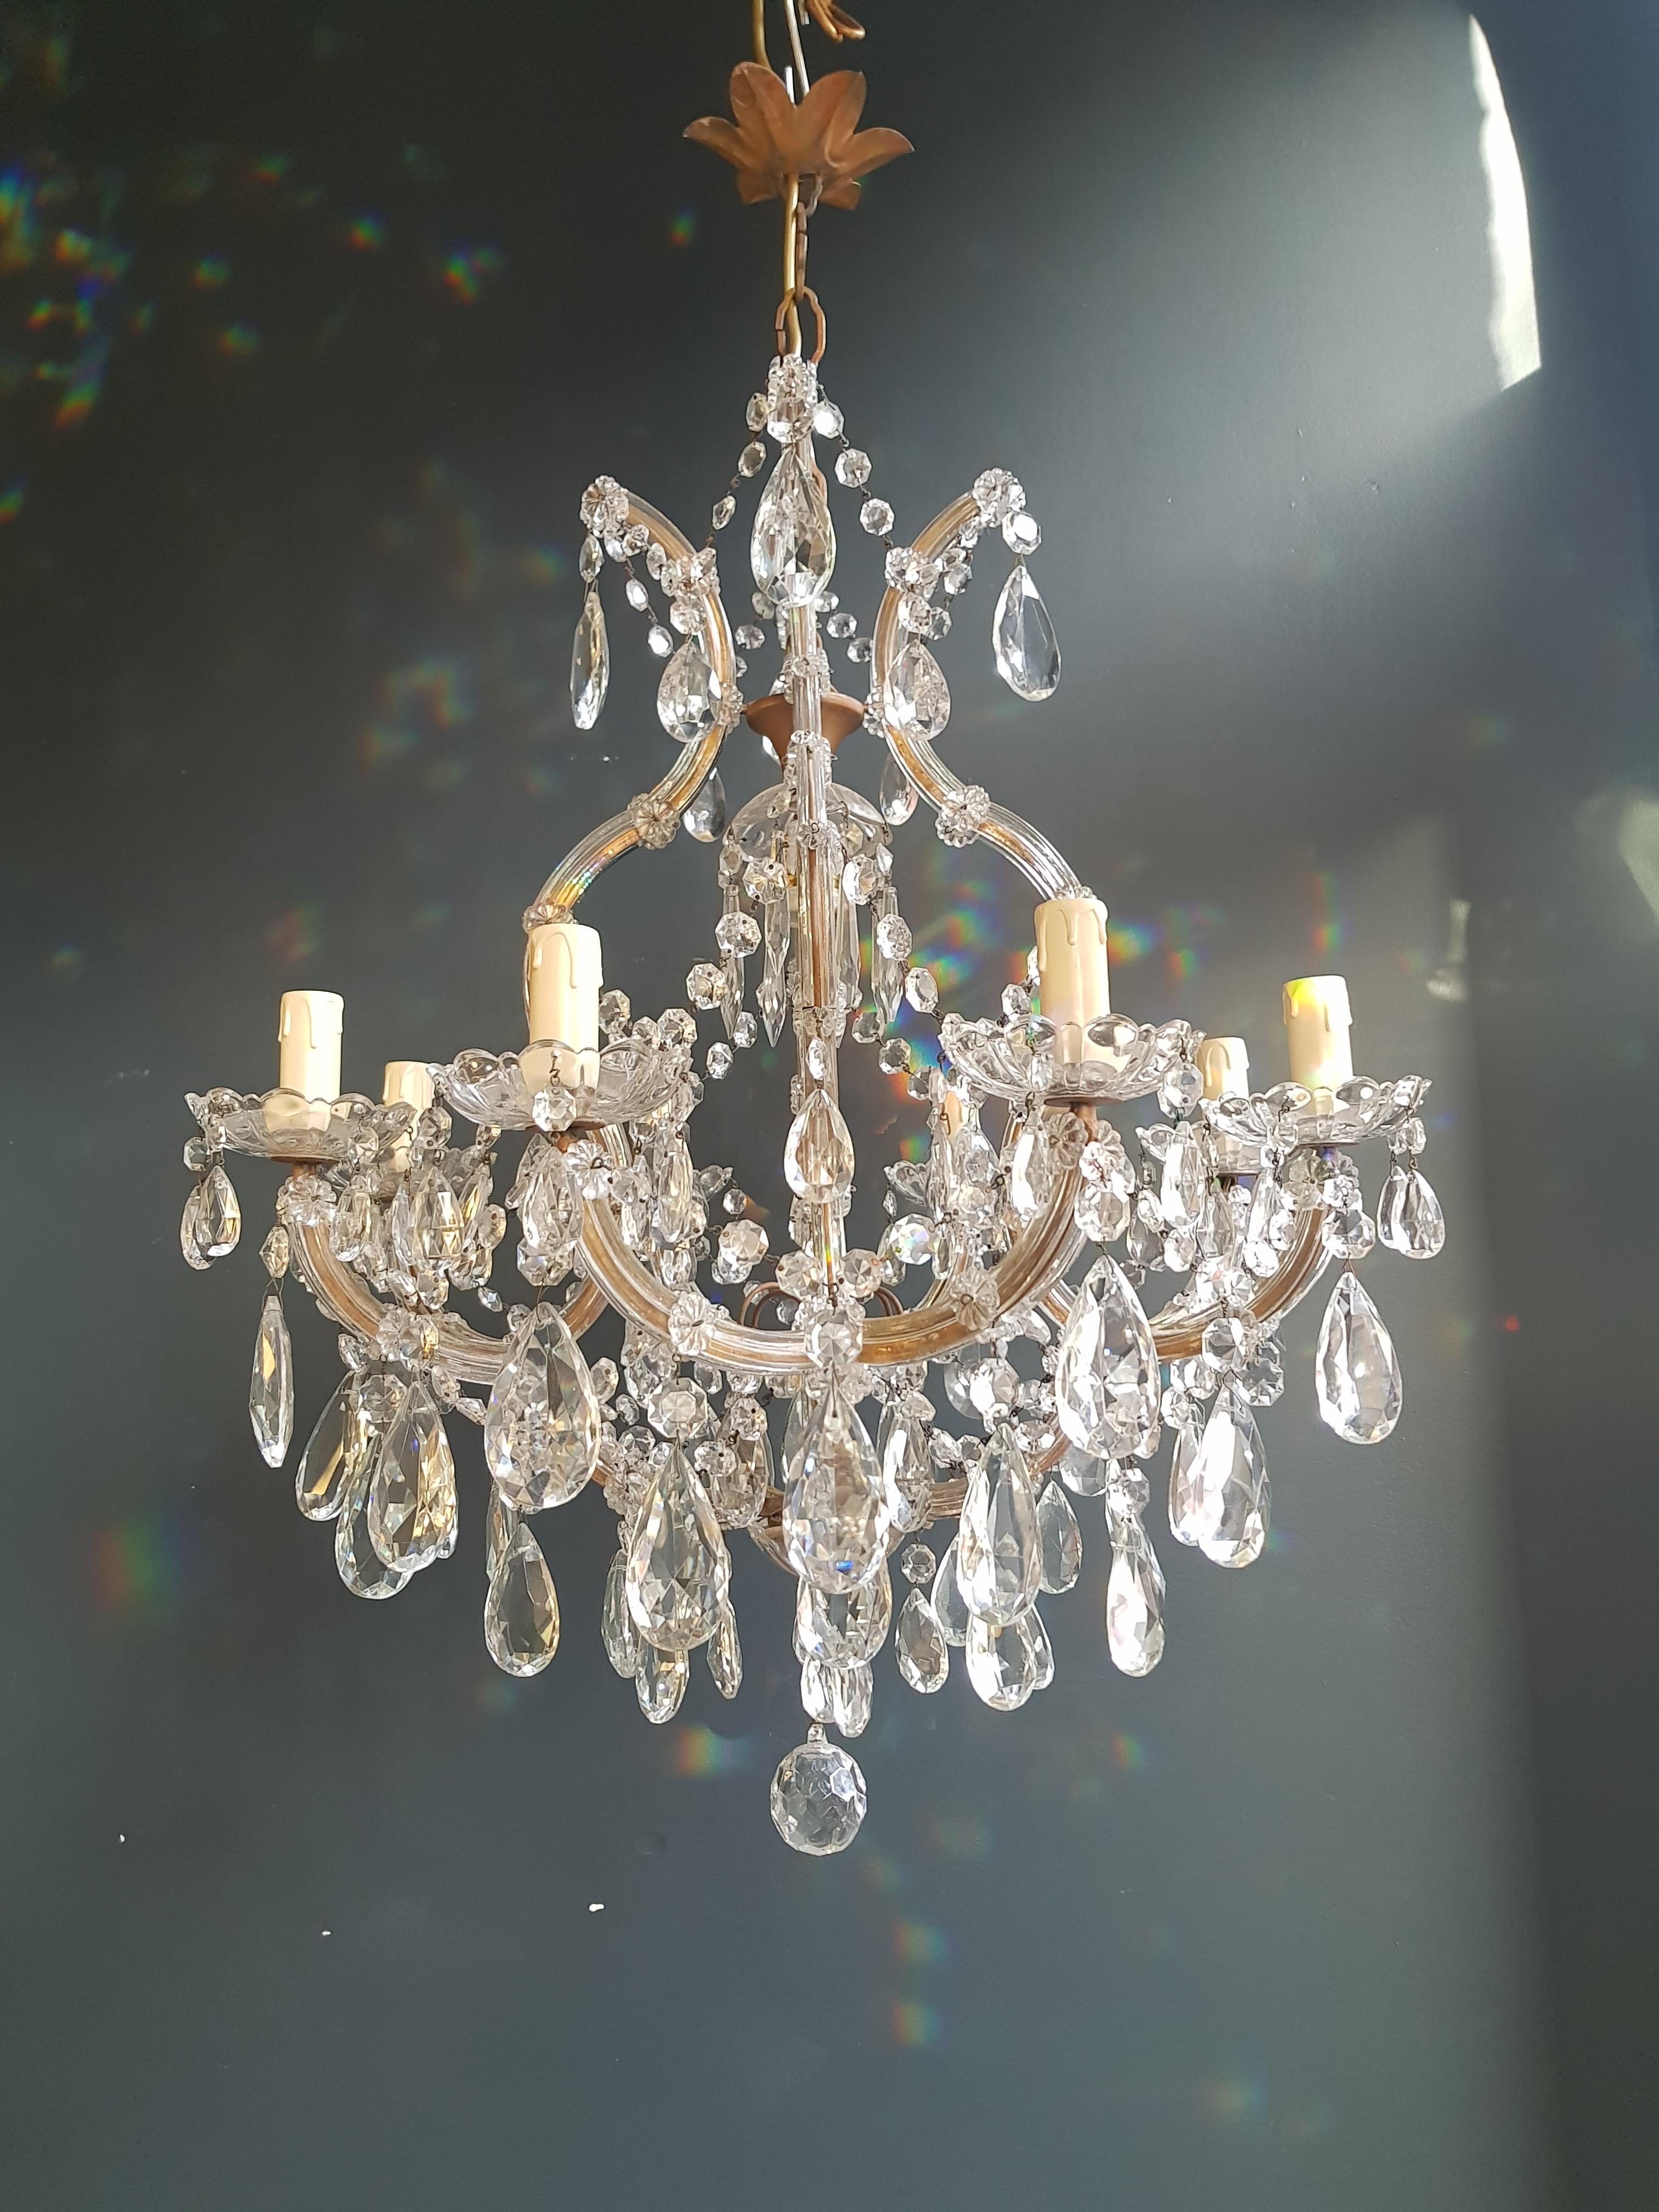 The frame is fully dressed all-over with glass. Cut crystal drops of different dimensions and shapes are hanging all-over the octagonal button chains, all around the chandelier.

Measures: Total height 150 cm, height without chain 70 cm, diameter 58